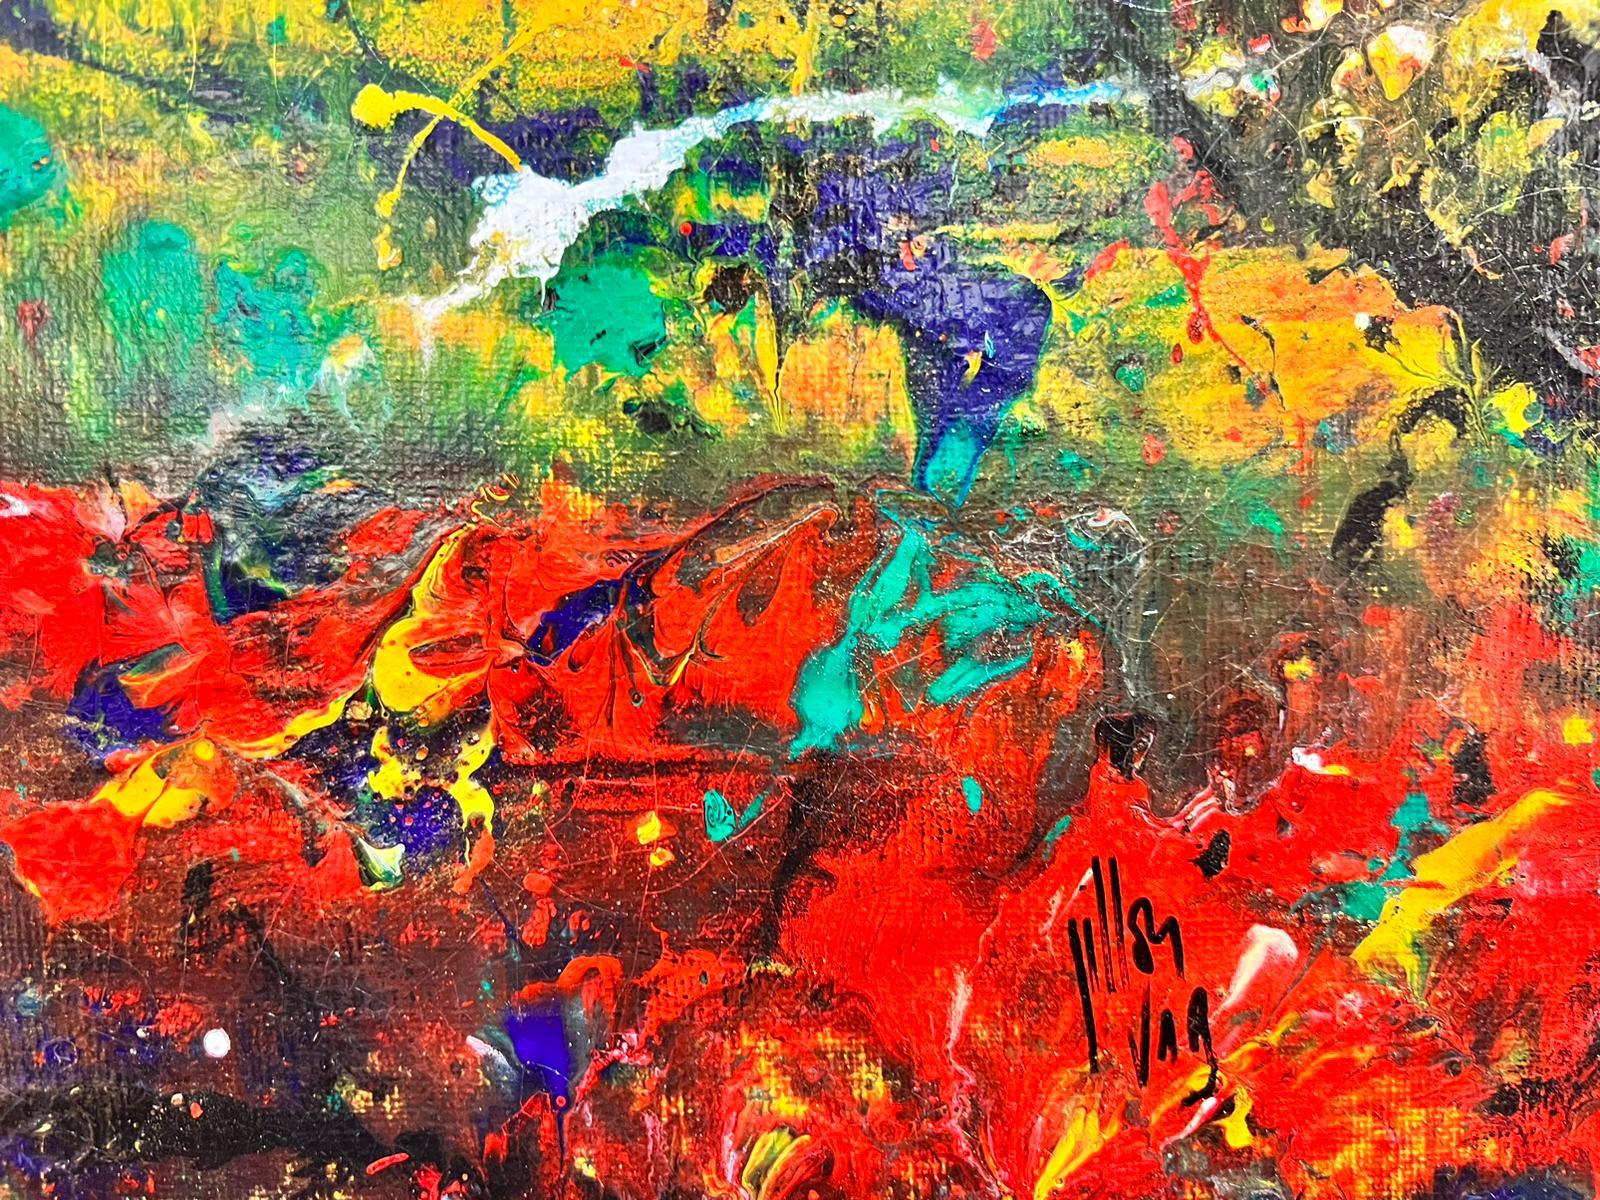 Artist/ School: French 21st century, signed lower right corner and with the location of the Var region in southern France. 

Title: splash abstract drip painting

Medium: acrylic on canvas, unframed

Size : 12 x 23.5 inches

Colors: Primary colors,